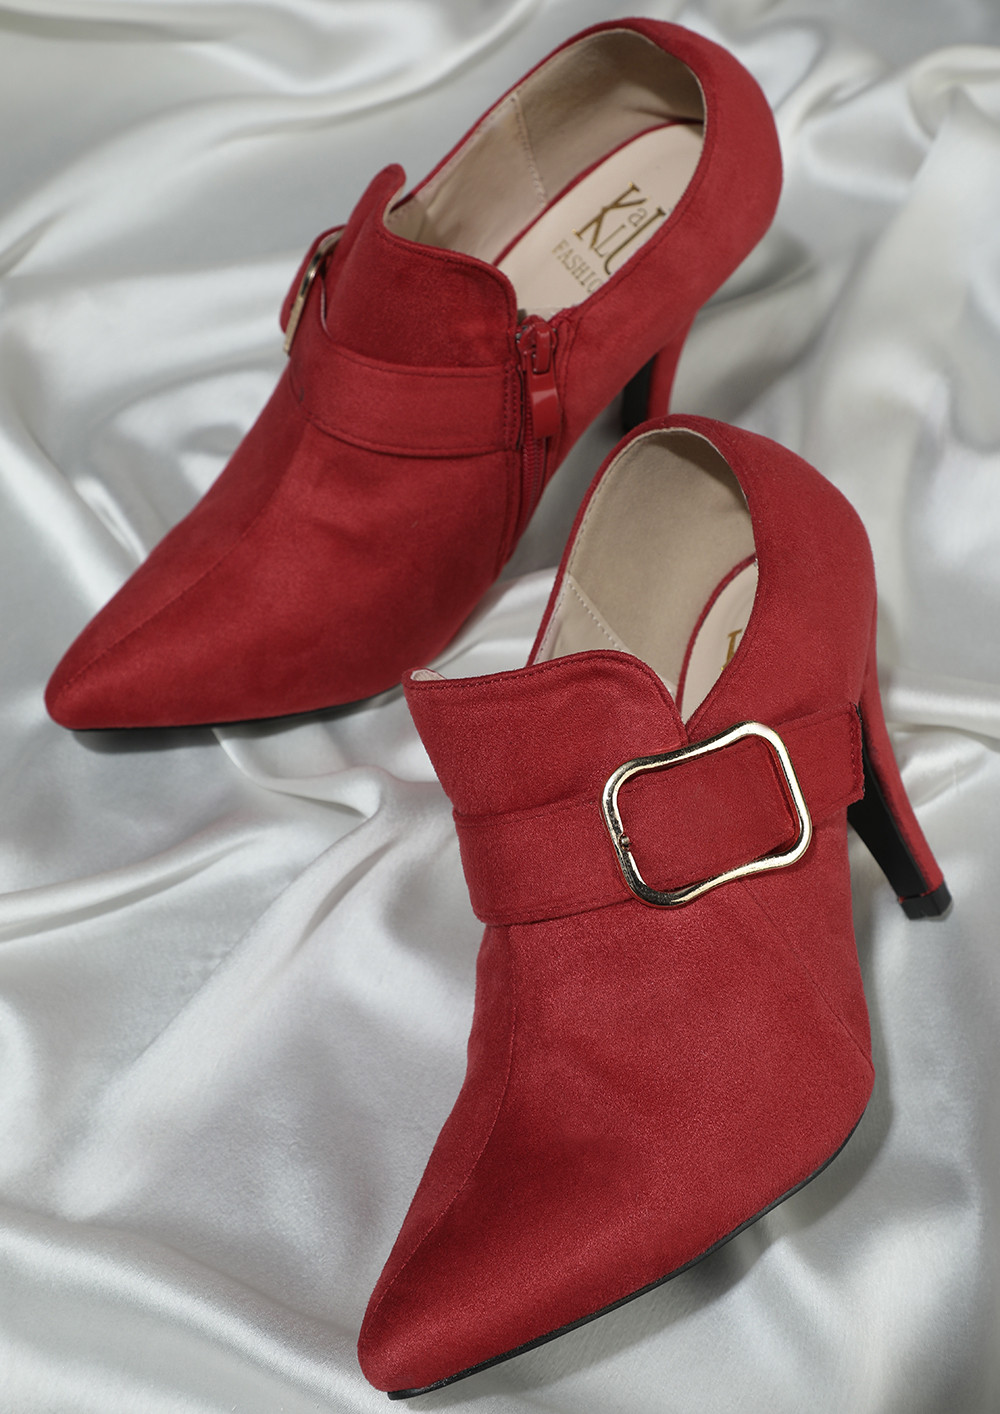 OFFICIALLY TEMPTING RED HEELED SHOES